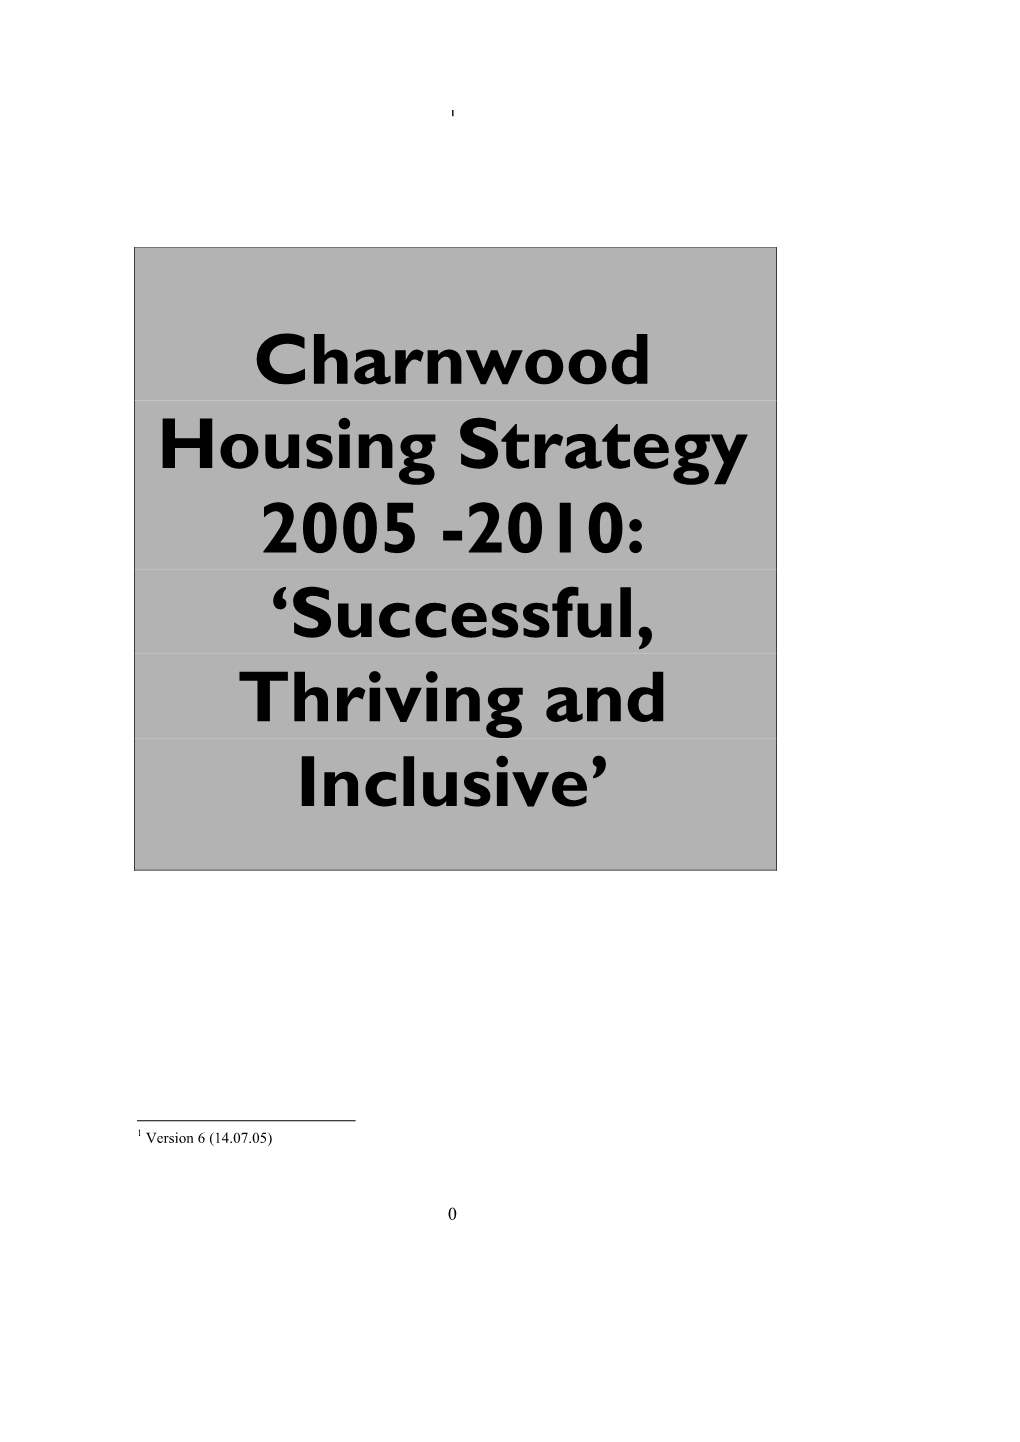 Charnwood Housing Strategy 2005 -2010: ‘Successful, Thriving and Inclusive’